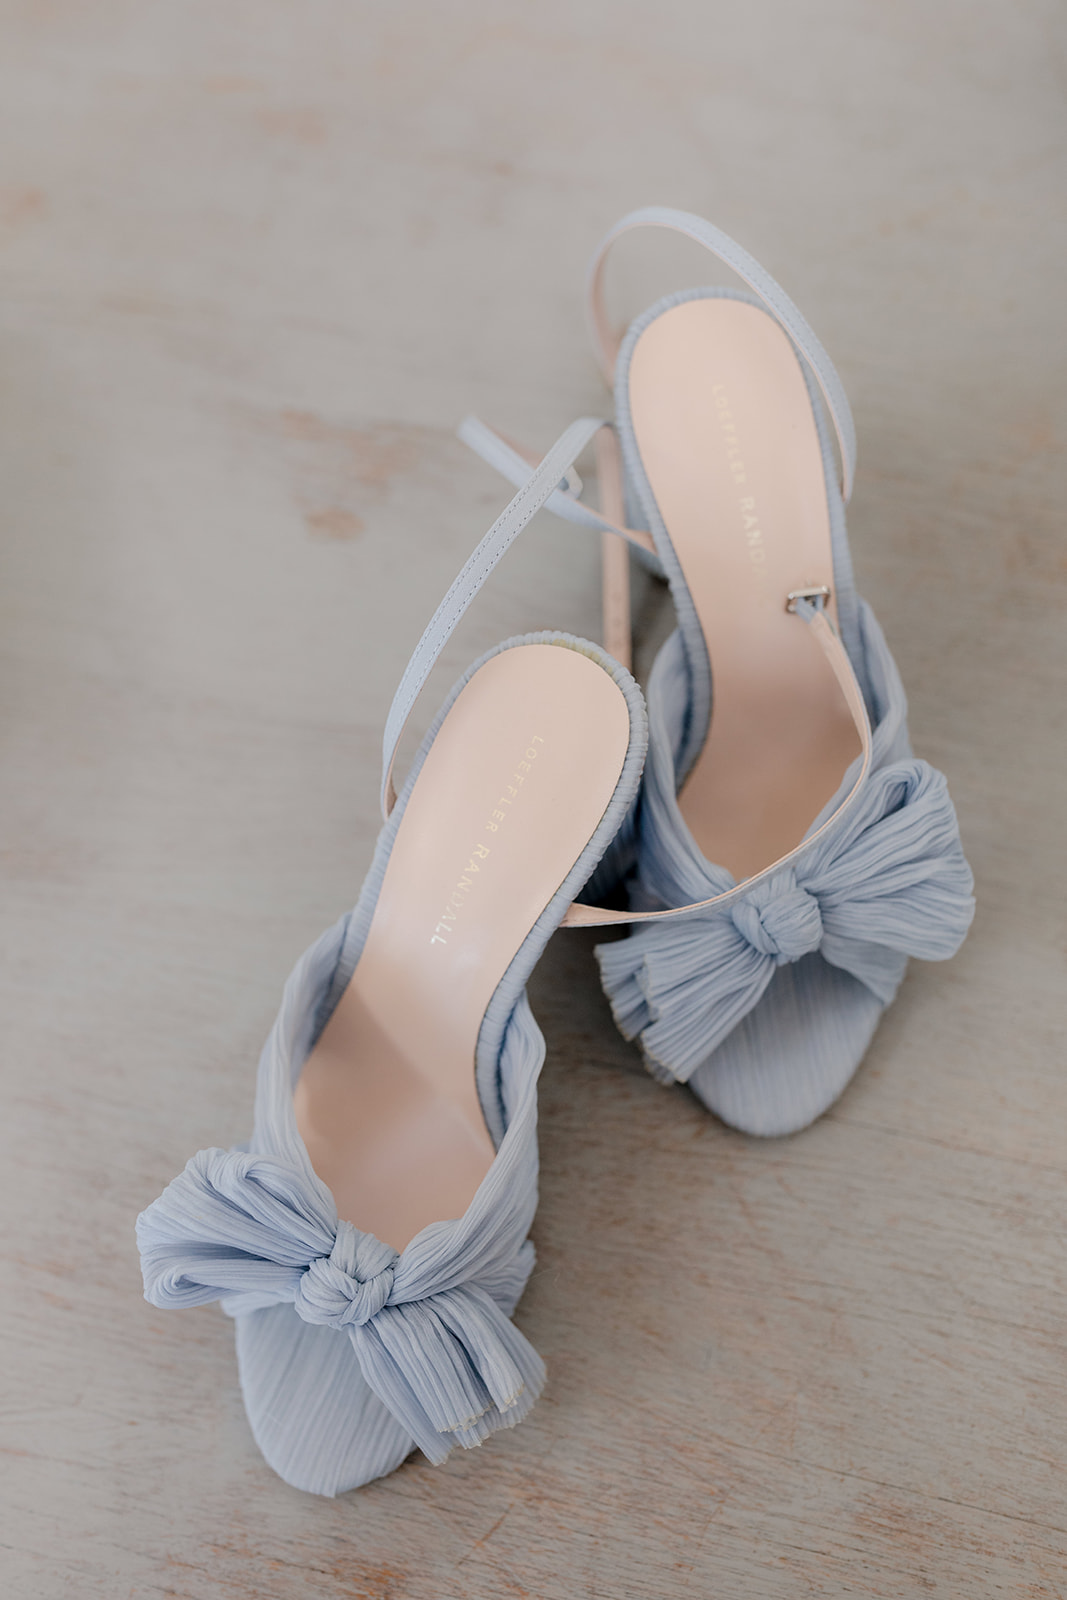 Close-up of chic baby blue bridal shoes for an elegant country wedding.